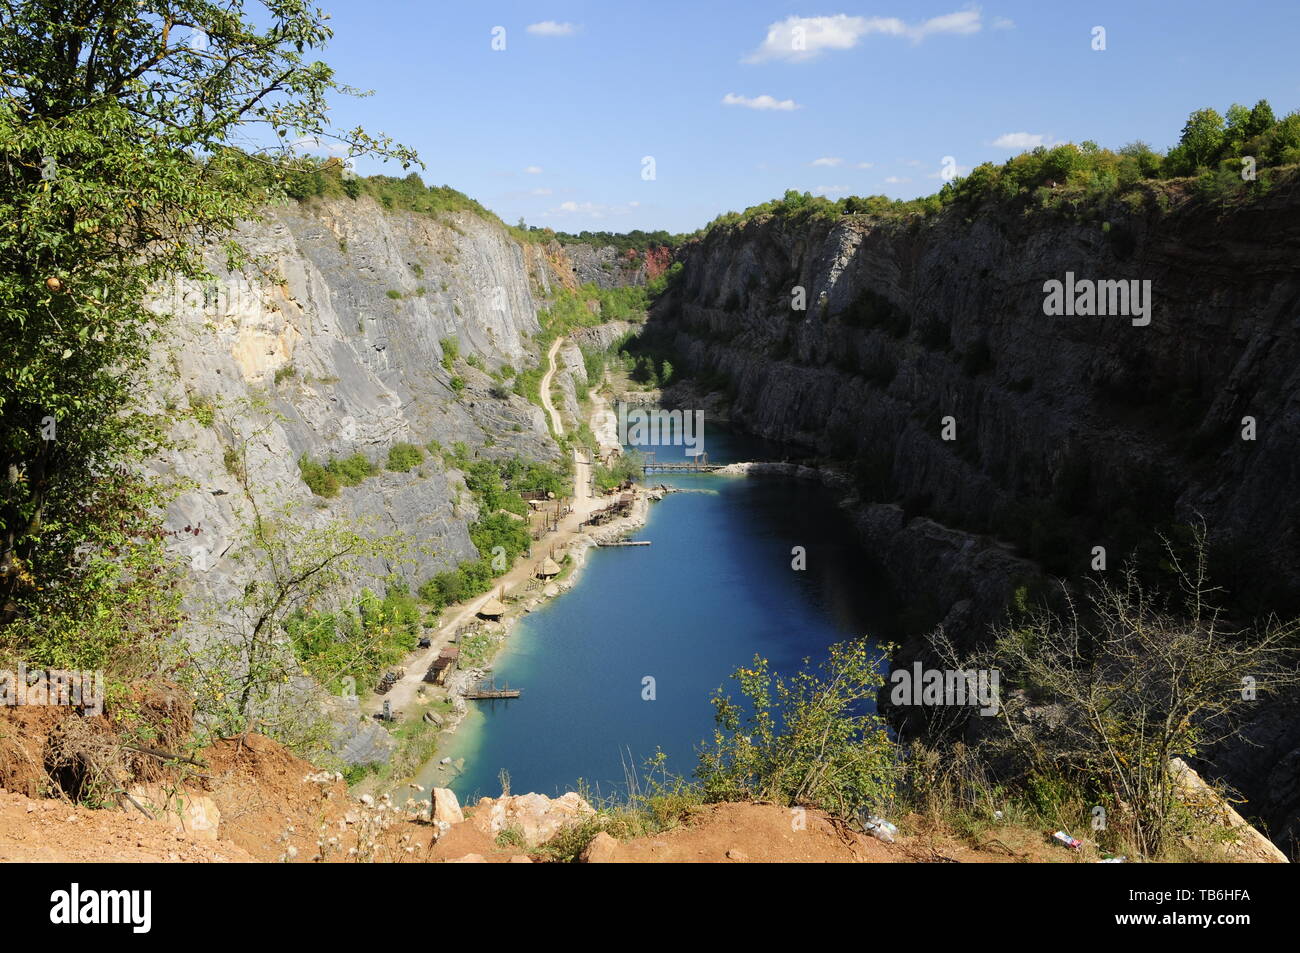 Big America, Czech Grand Canyon, is a partly flooded, abandoned limestone quarry near Morina village, Central Bohemian Region, Czech Republic, August  Stock Photo